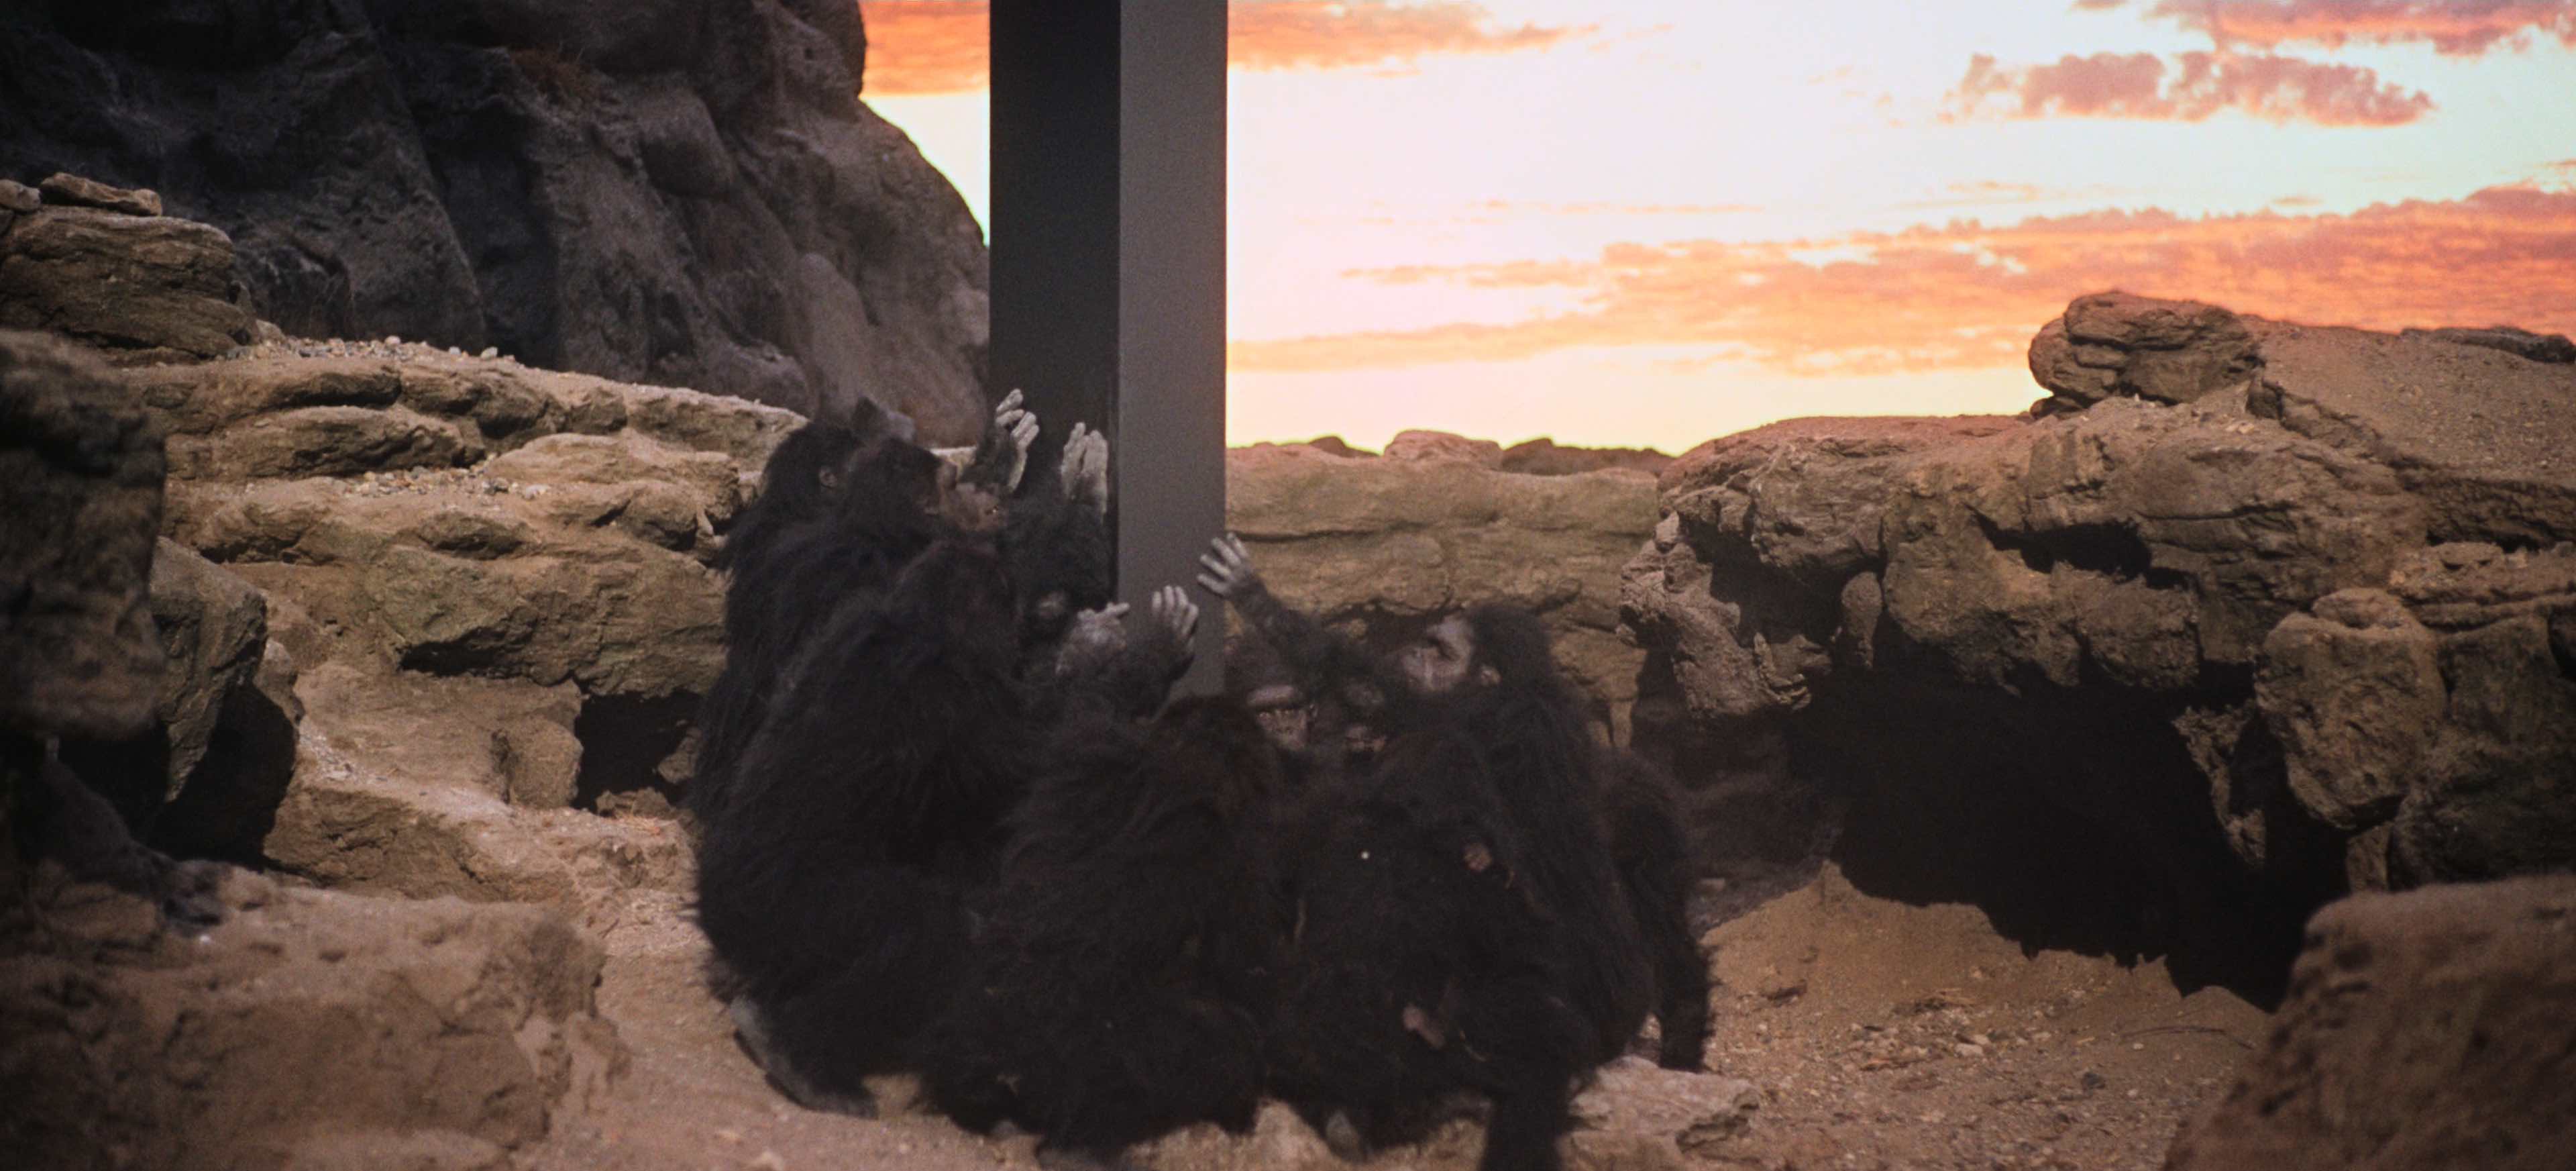 Film still from Kubrick's 2001: A Space Odyssey, showing a monolith surrounded by early hominids.